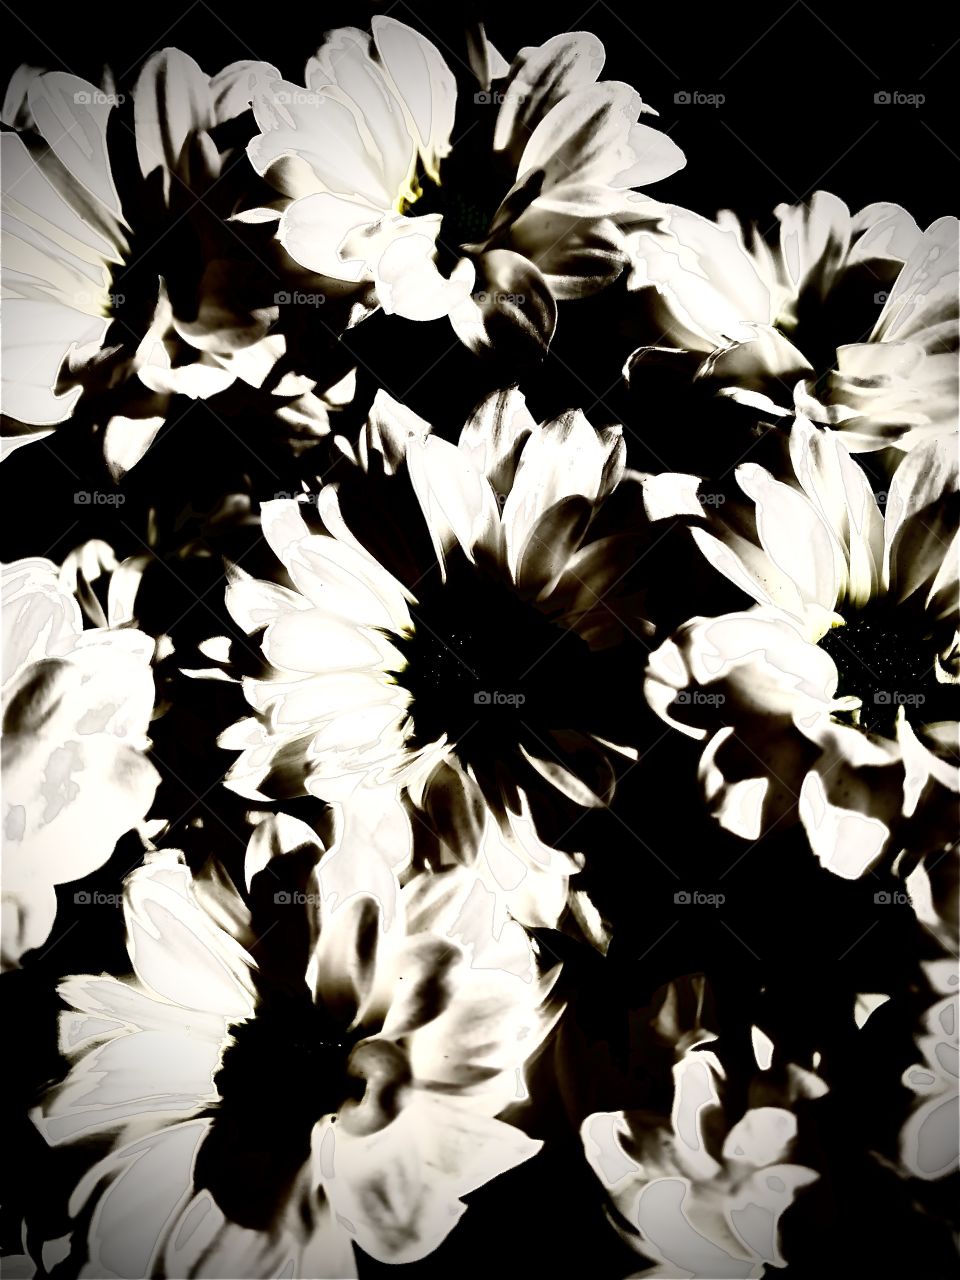 A black and white abstract that I created from the image of some flowers